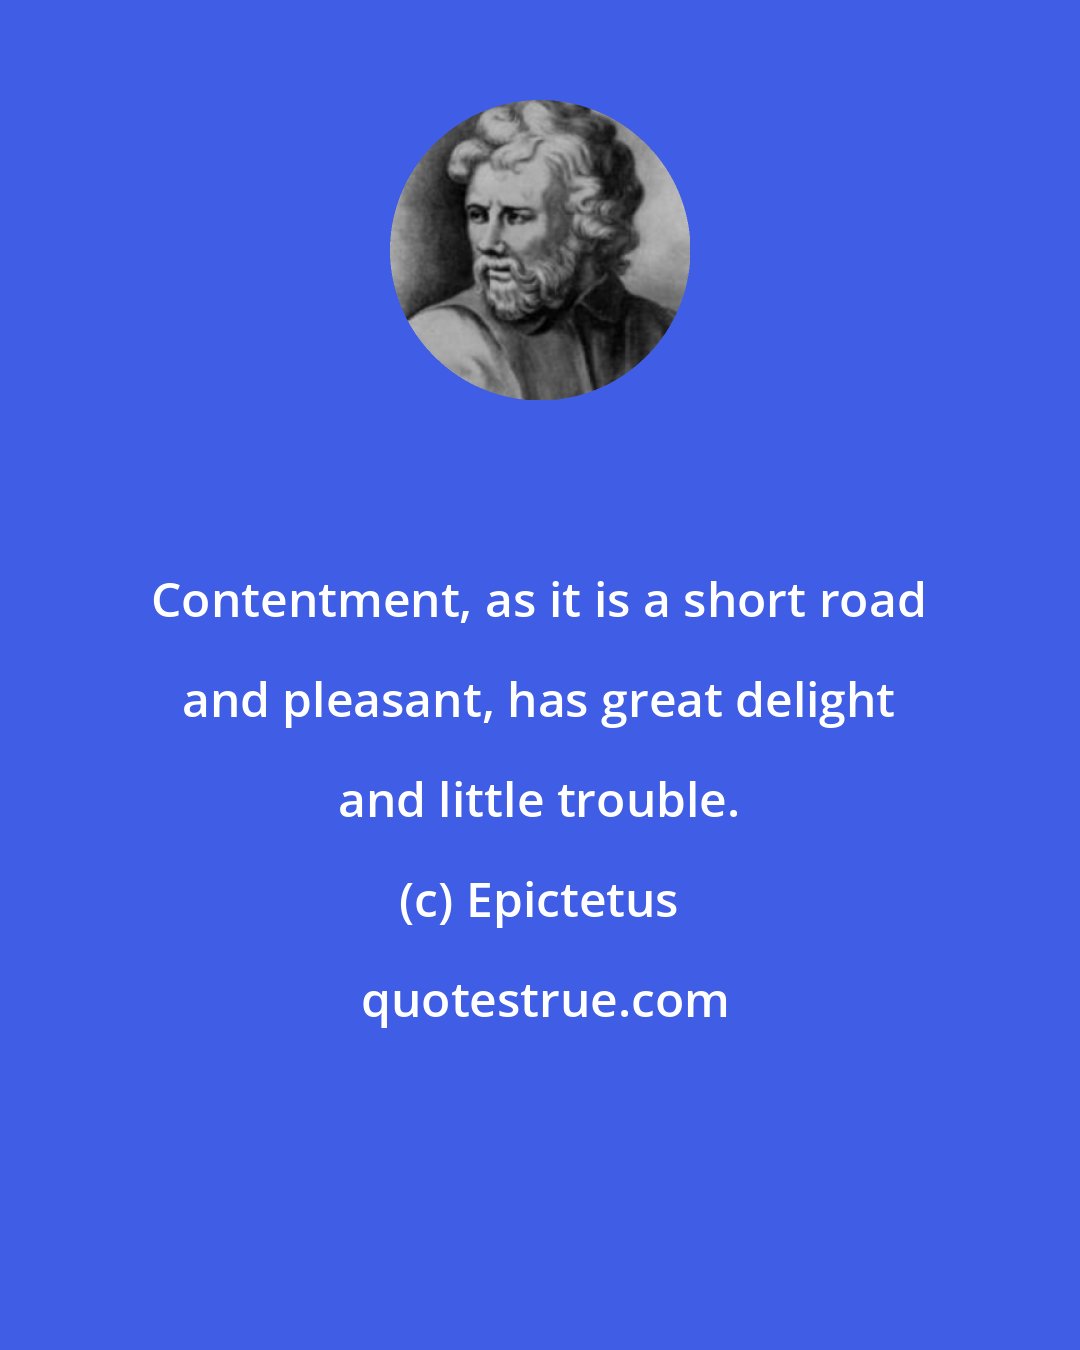 Epictetus: Contentment, as it is a short road and pleasant, has great delight and little trouble.